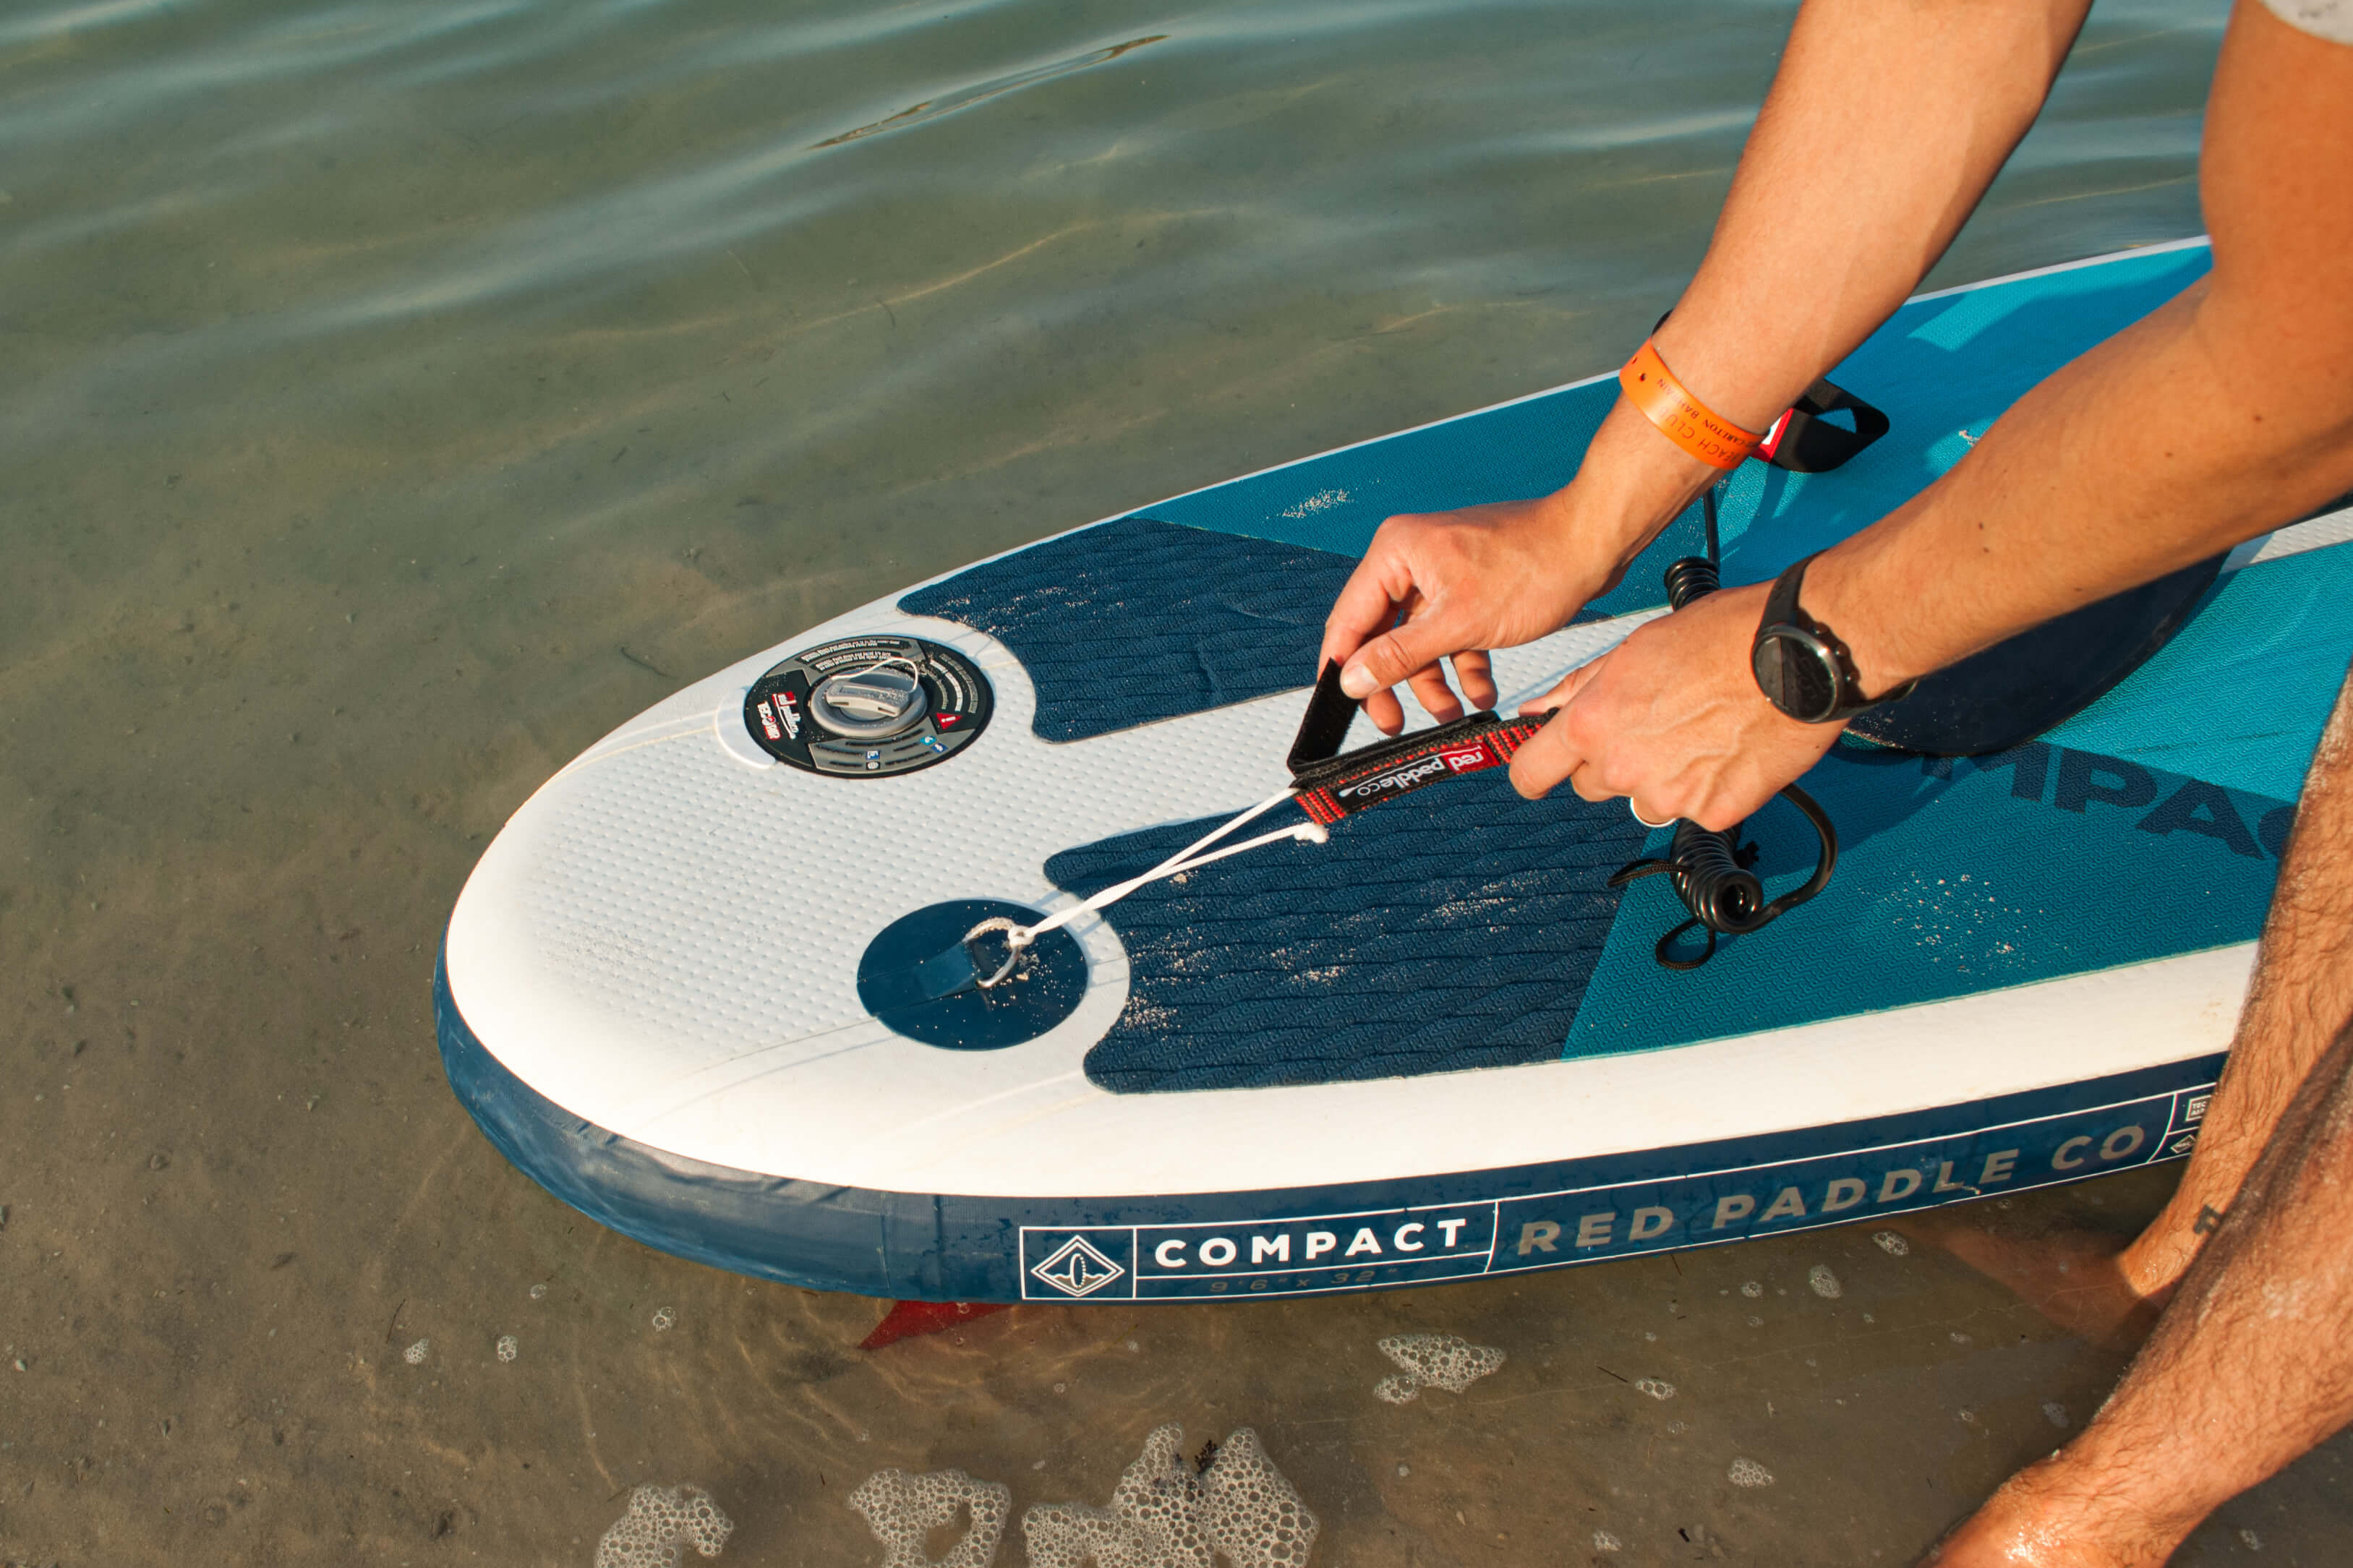 Man Attaching A SUP Leash To A Red Compact Paddle Board